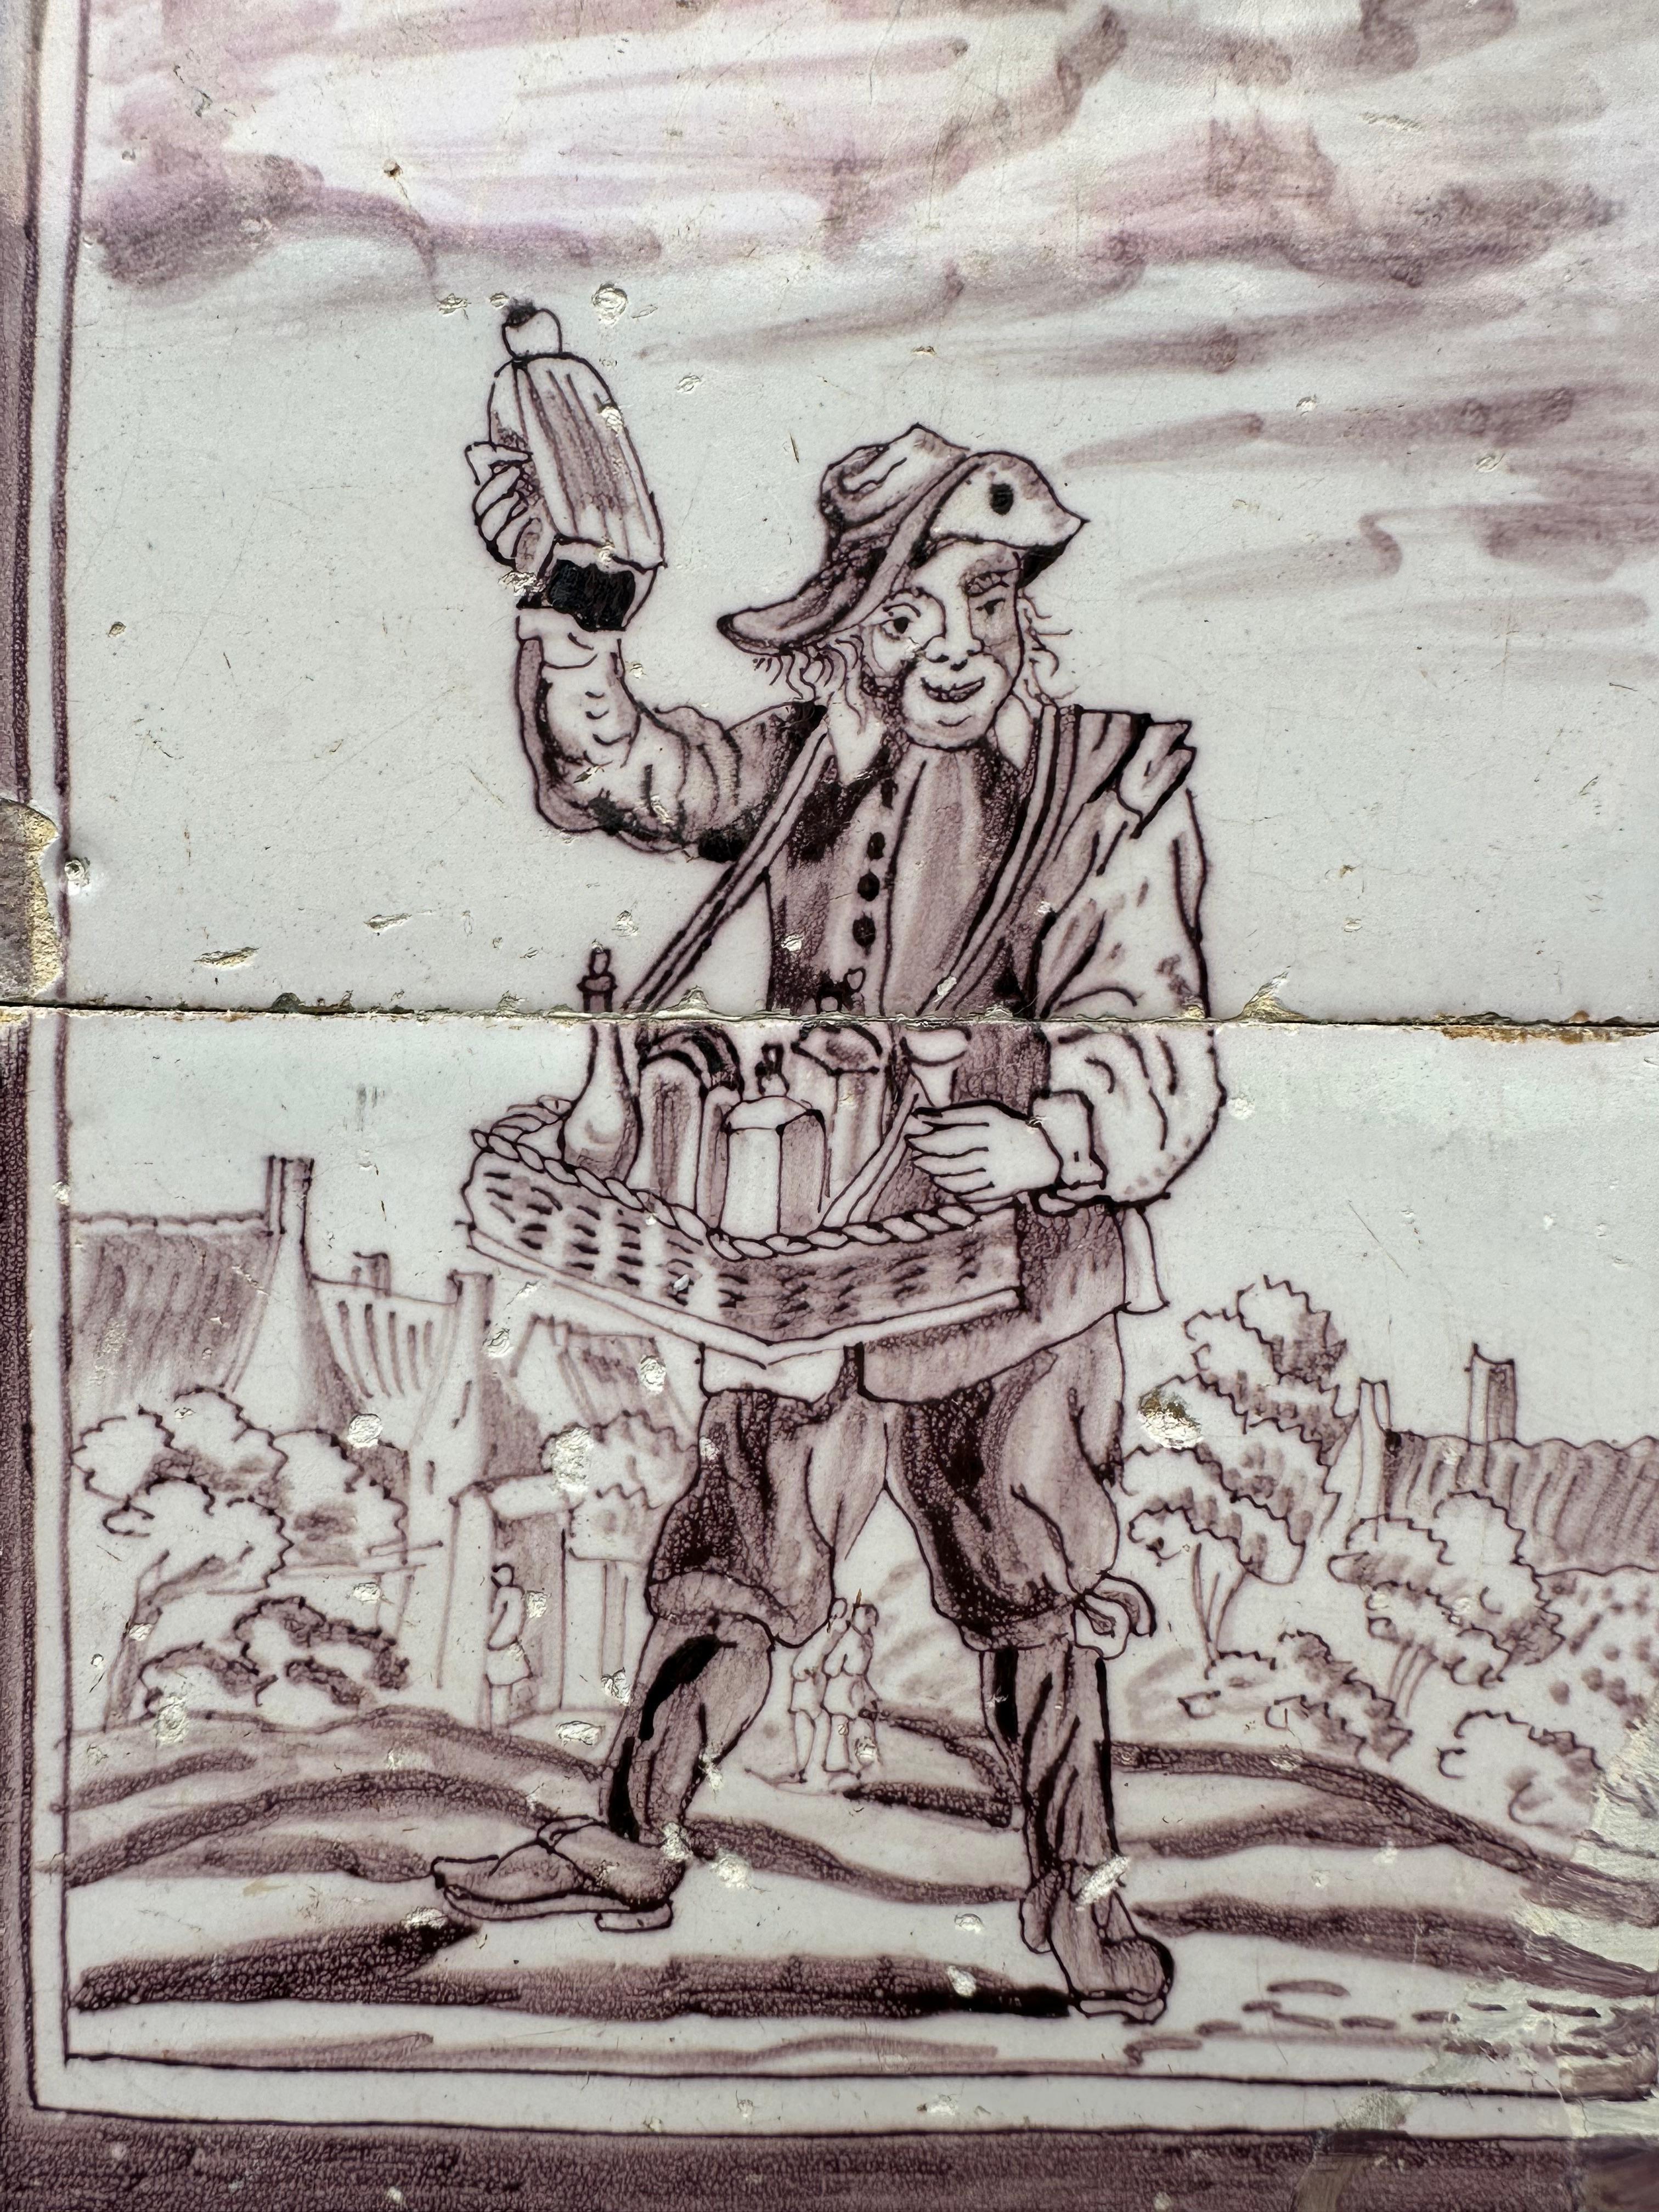 The Netherlands
Rotterdam
Circa 1725 – 1775

A manganese tile panel of two tiles, probably the base of a pillar, with the decoration of a liquor seller, and by the look on his face he had quite the taste of his merchandise! Beautiful detail in the